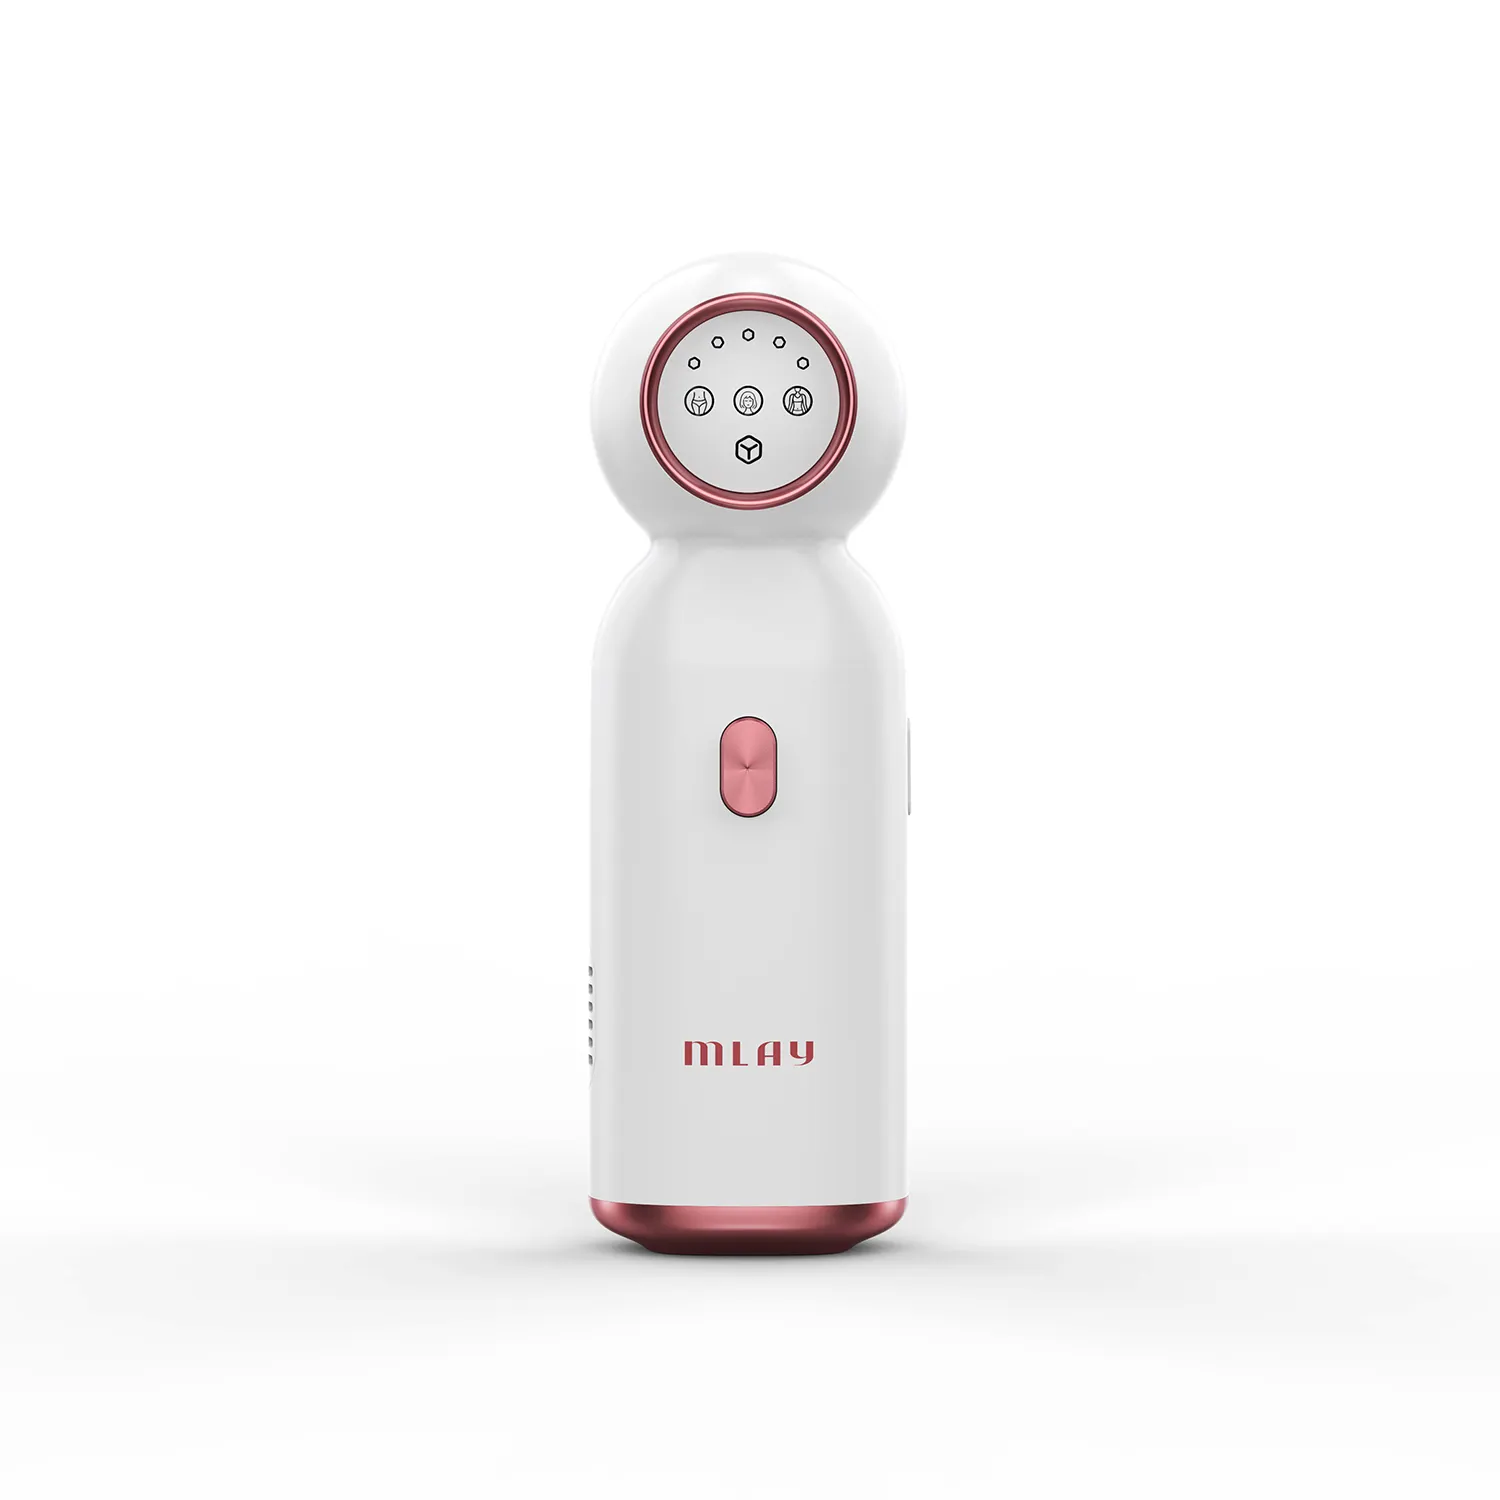 MLAY T10 Professional Depilator Machine Permanent Laser Hair Removal Home Use IPL Hair Removal Epilator